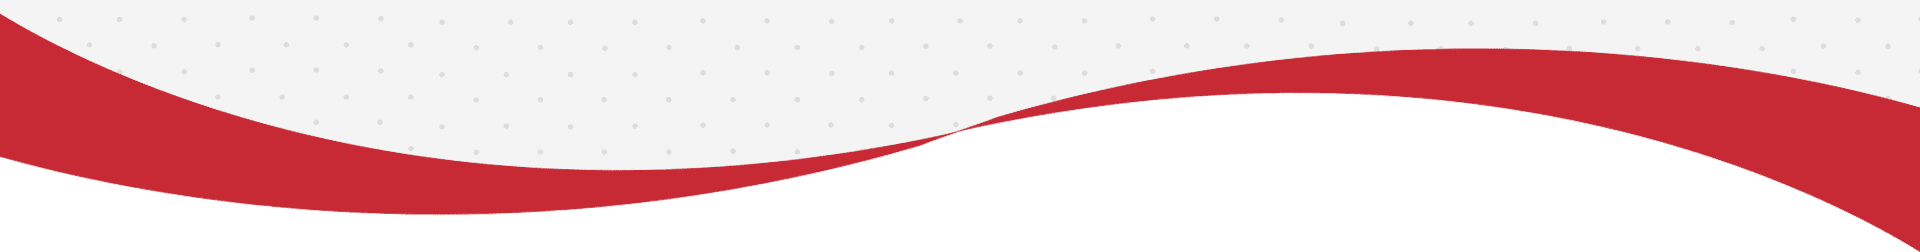 A green and red background with white dots.